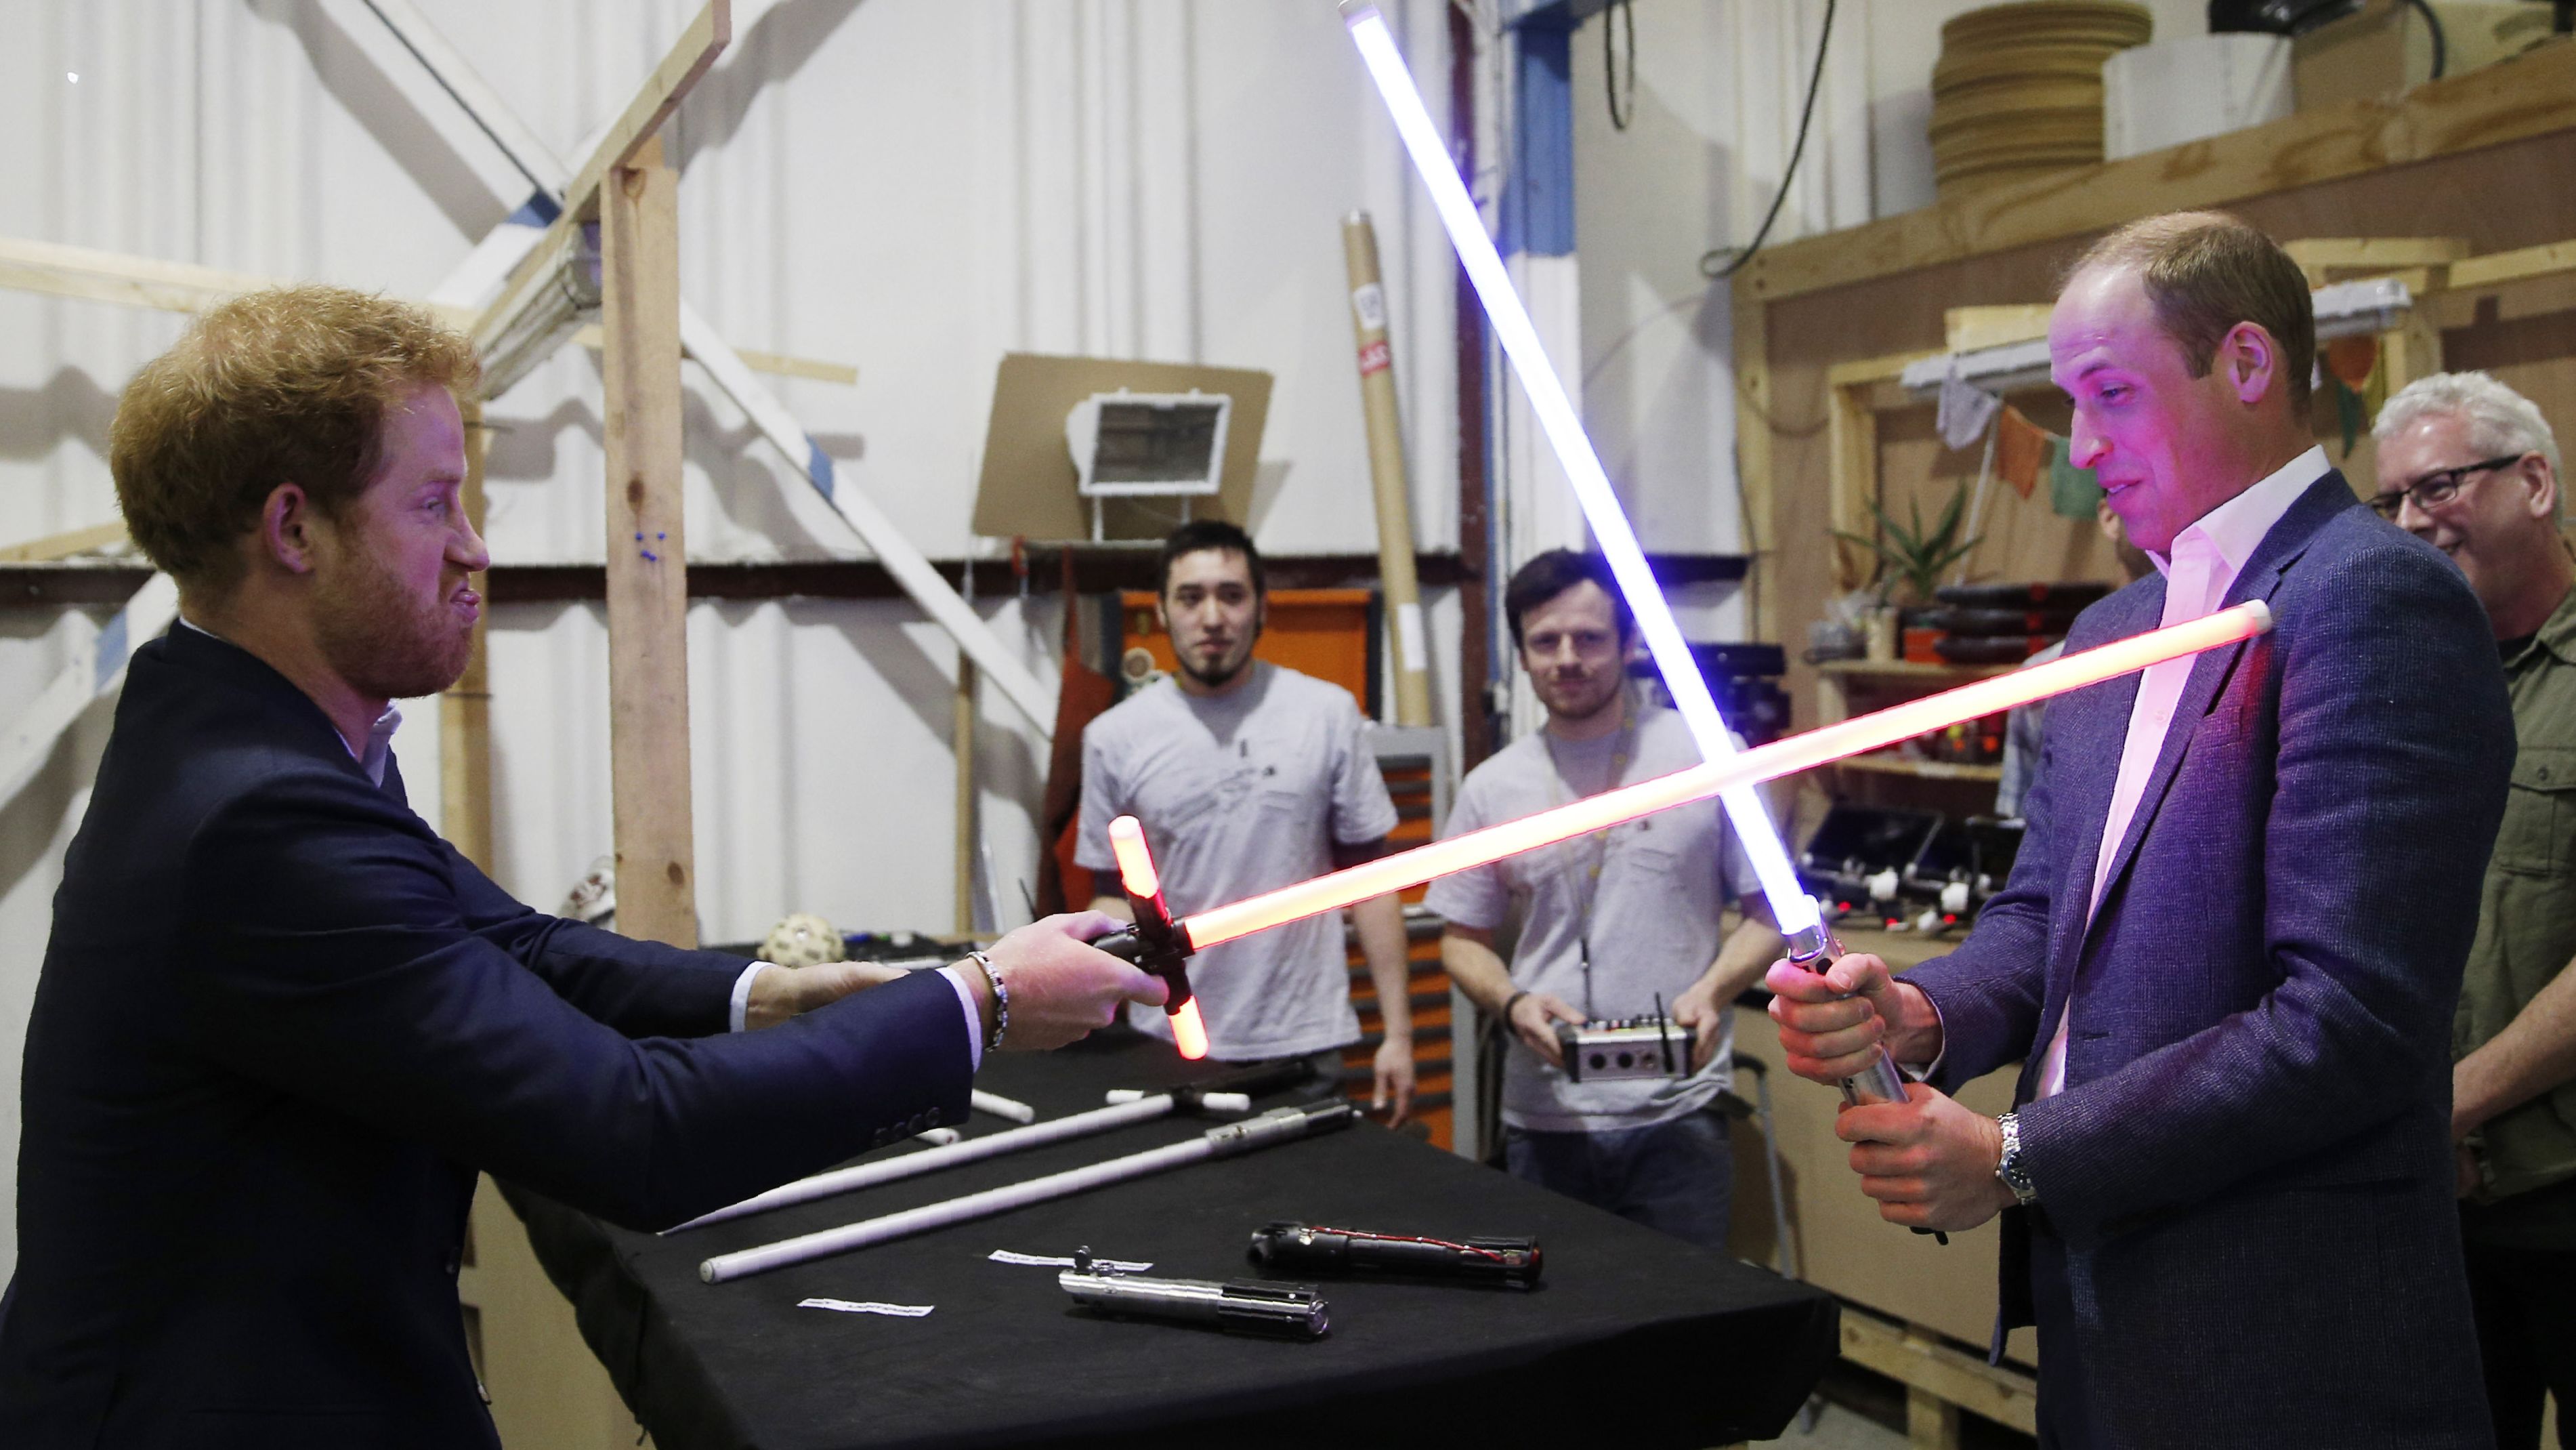 Prince William and Prince Harry try out "Star Wars" lightsabers during a tour of the movie sets in Iver Heath, England, in April 2016.